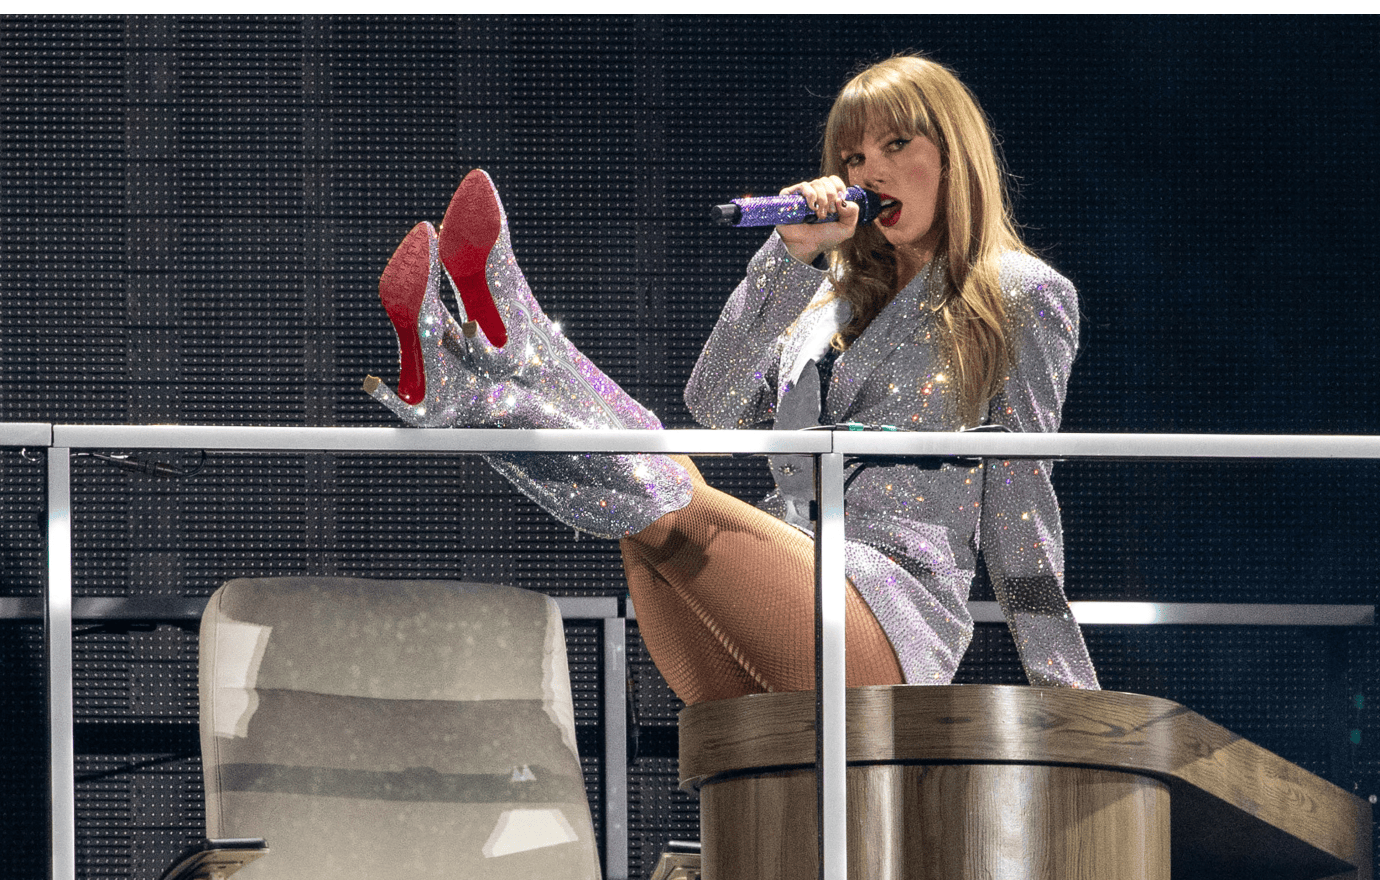 Fans Speculate Taylor Swift Hinted At Her Breakup With Setlist Change